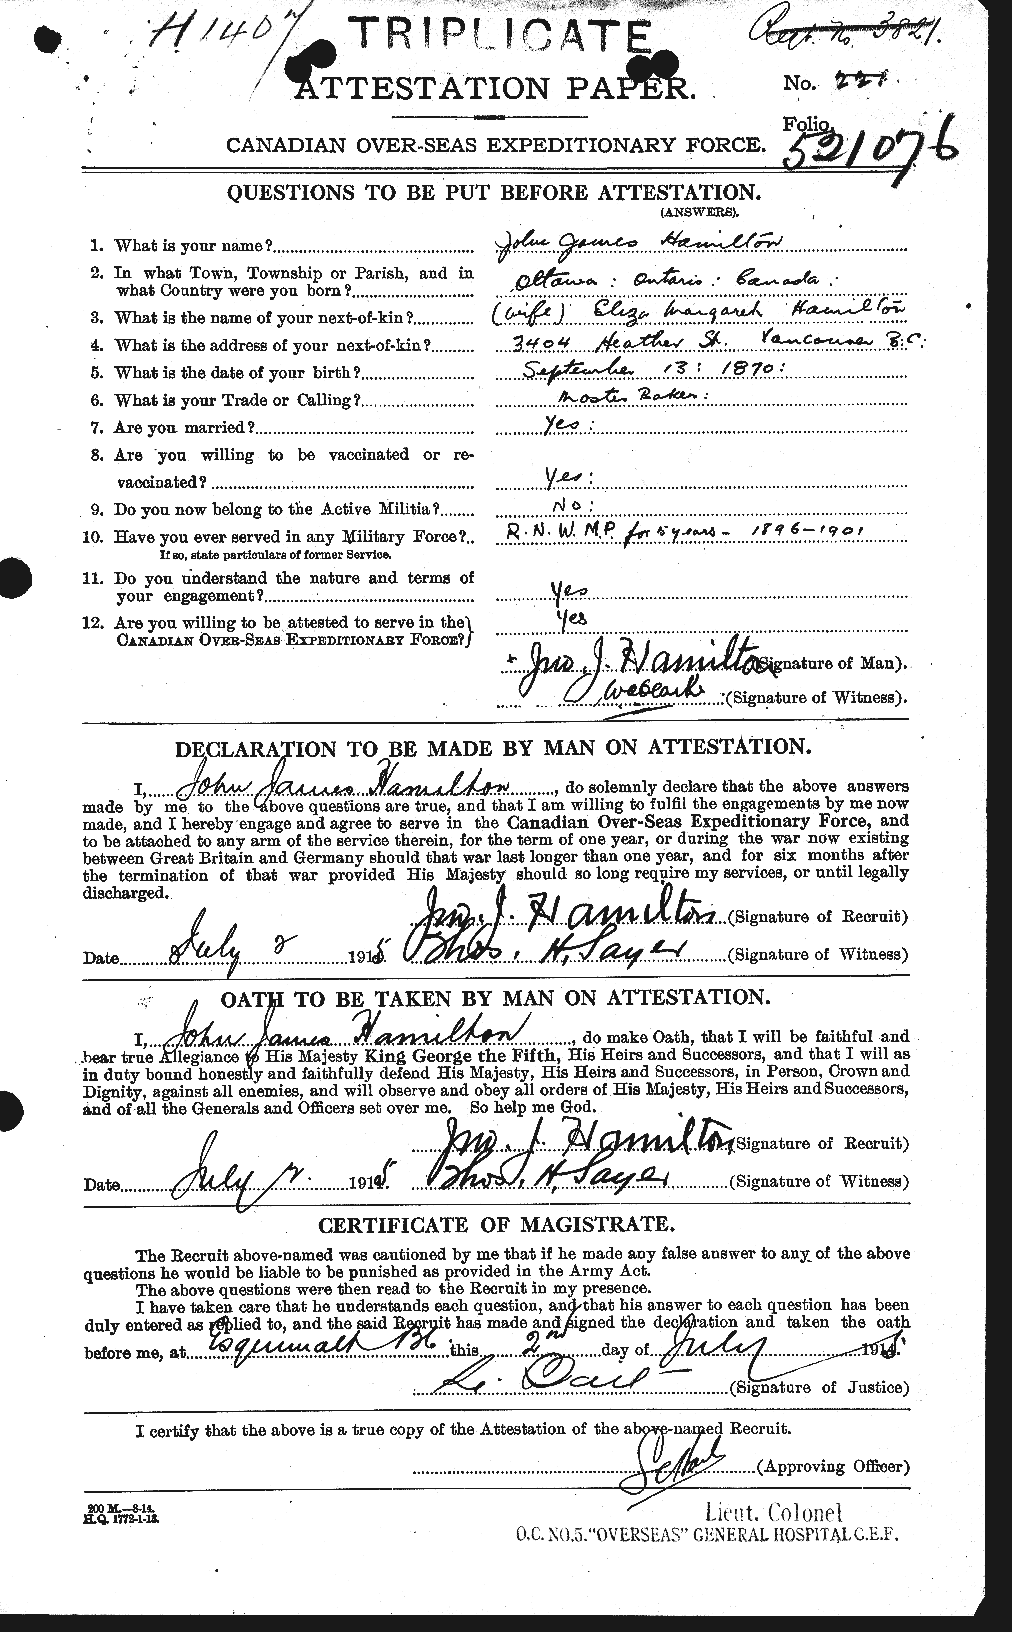 Personnel Records of the First World War - CEF 373093a